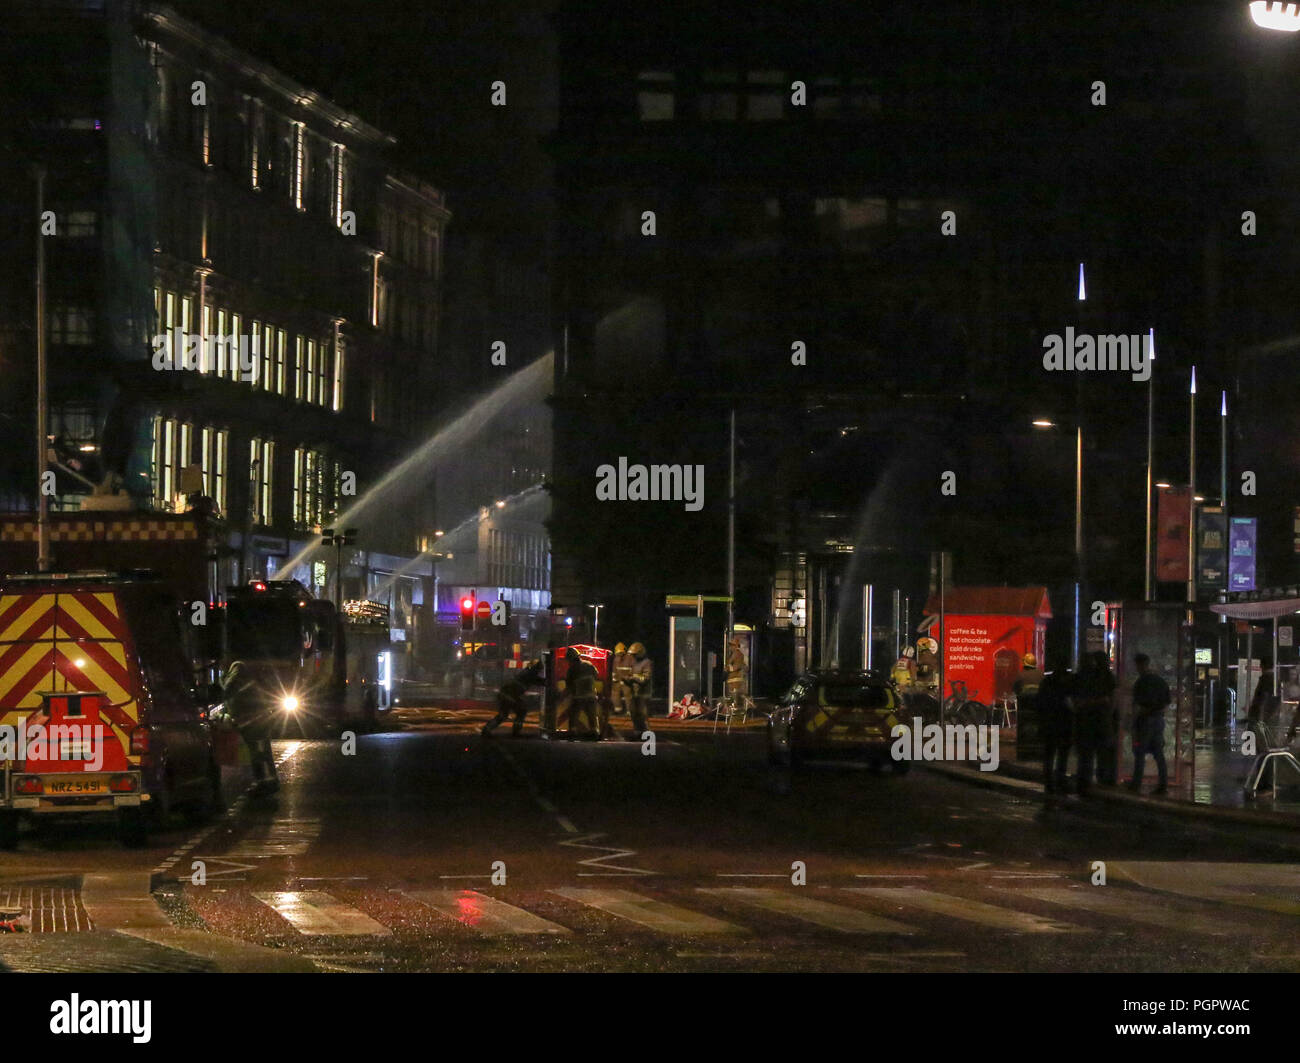 Primark store, Bank Buildings, Belfast, Northern Ireland. 28 August 2018. Belfast has been rocked by the destructive fire that has ravaged the Primark store in Belfast. The building - the Bank Buildings - is a landmark building built in 1785.The store was near the end of a Â£30m renovation/extension when fire broke out around 11 am (BST). Fifteen appliances attended the catastrophic fire with water having to be pumped from the River Lagan (1 km away) to fight the blaze. Credit: David Hunter/Alamy Live News Stock Photo